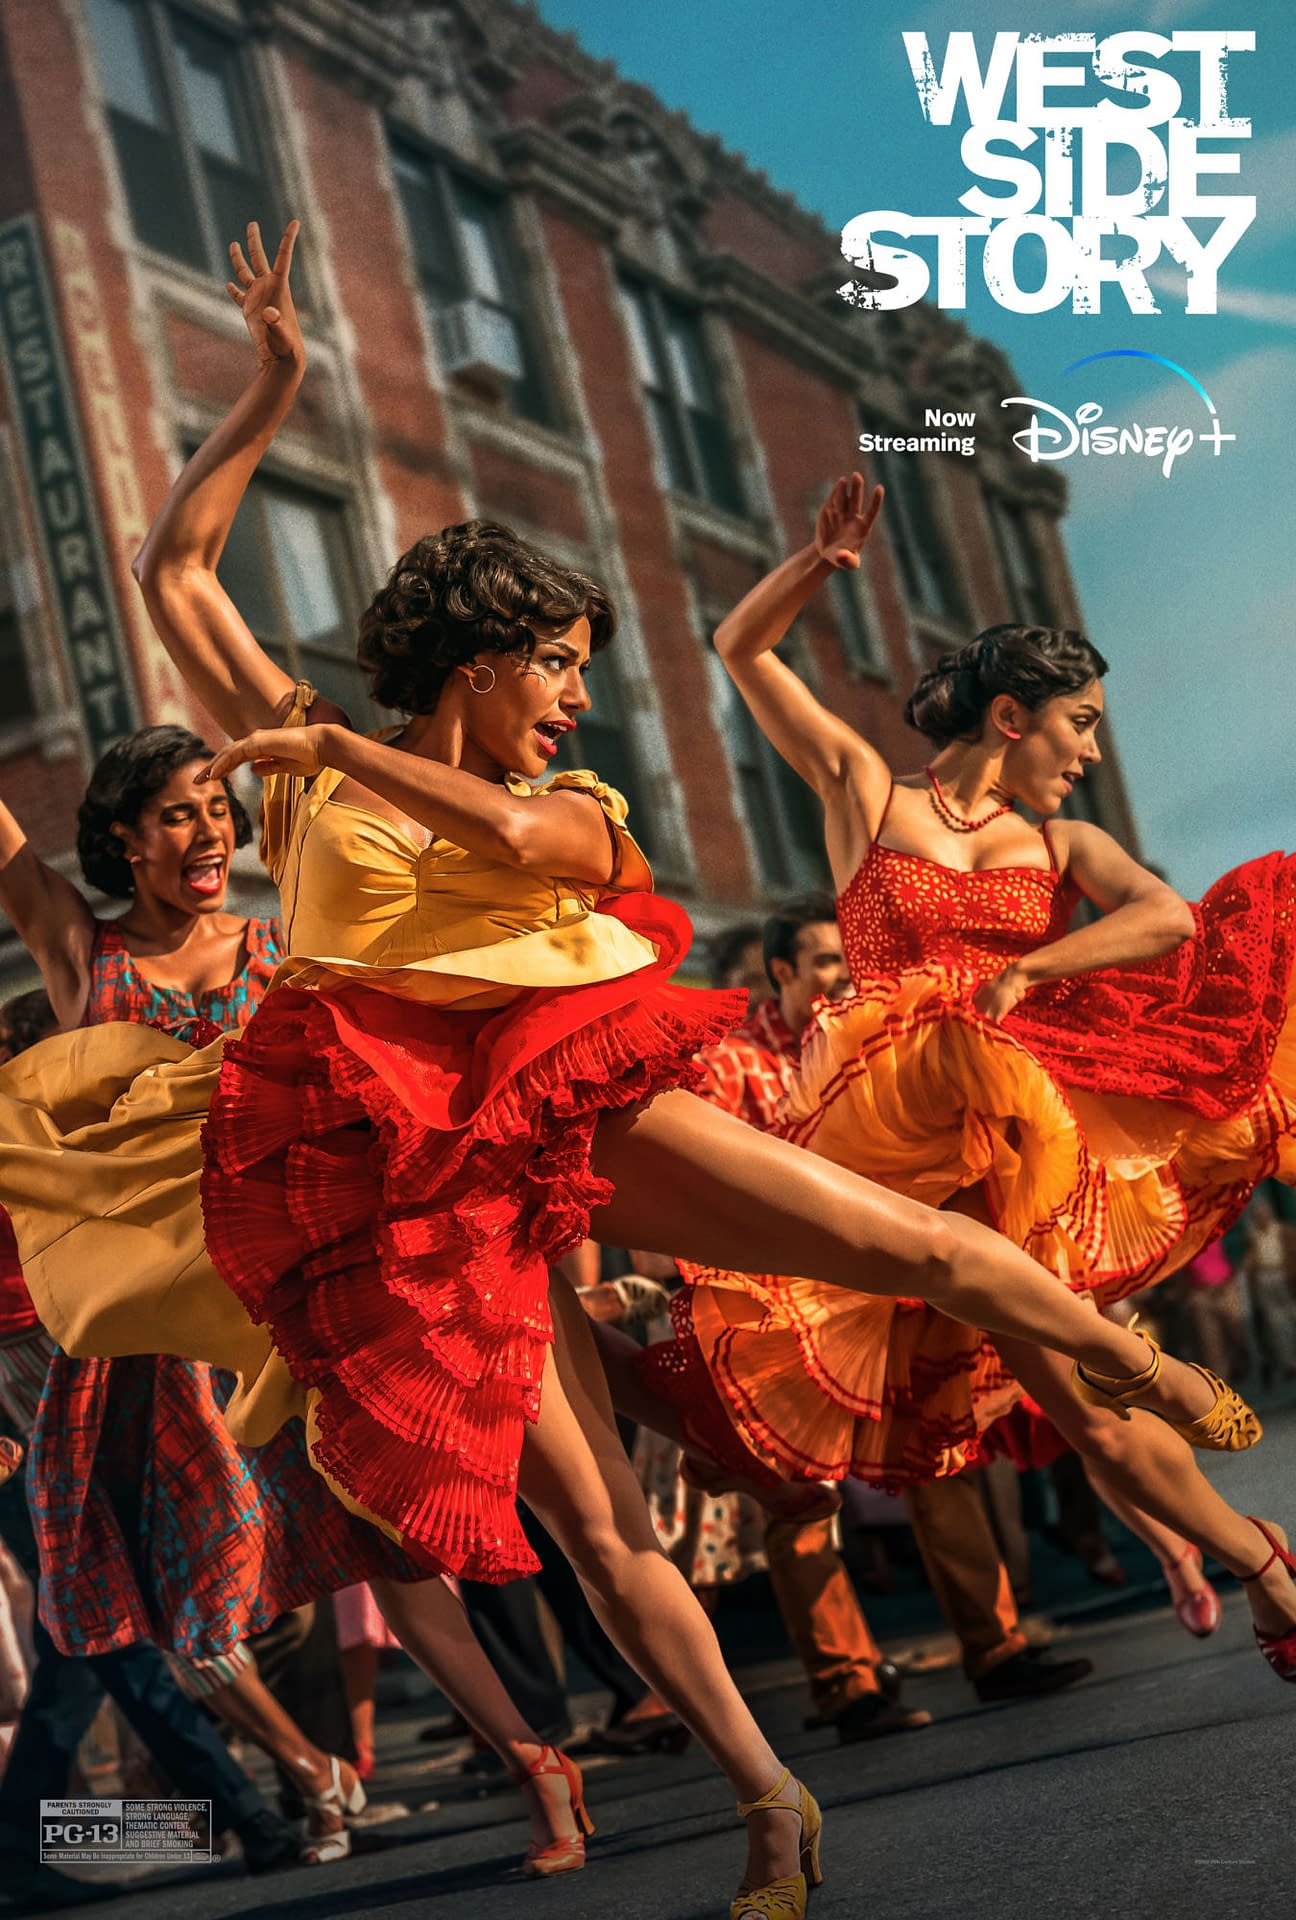 West Side Story Is Now Streaming on Disney+, 2 New Posters